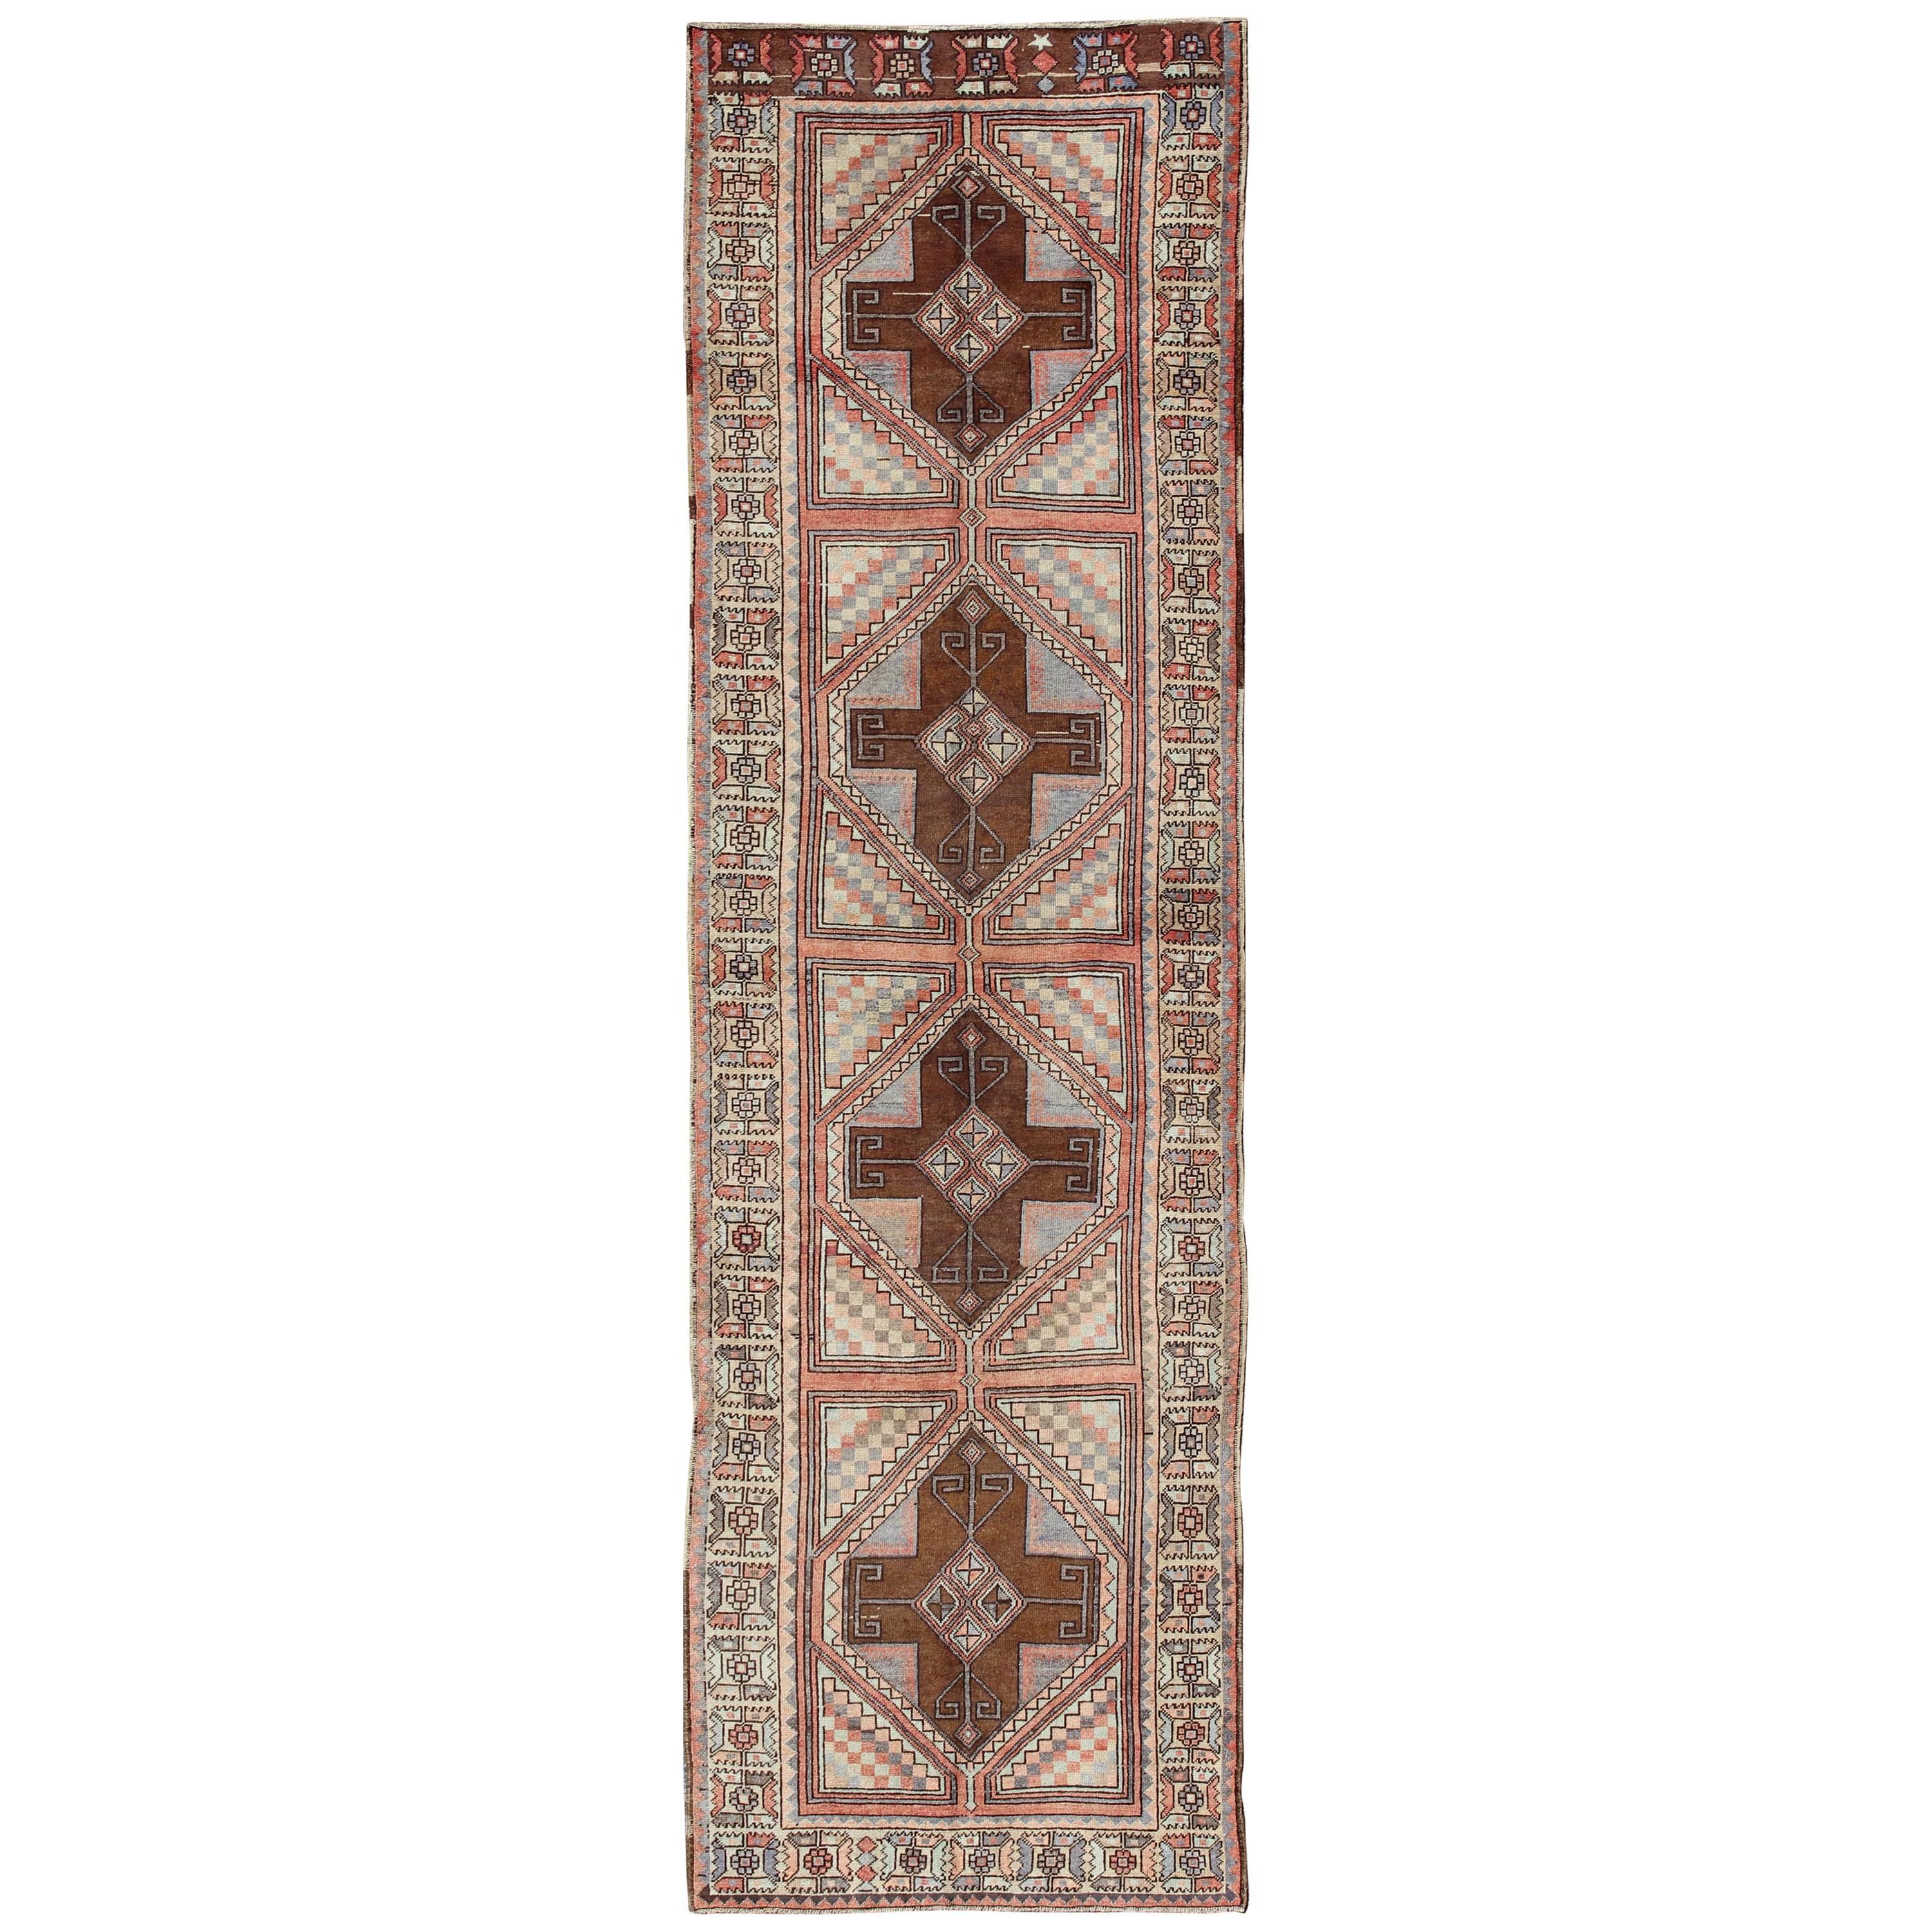 Multicolored Vintage Long Turkish Oushak Runner with Cross Shapes Design